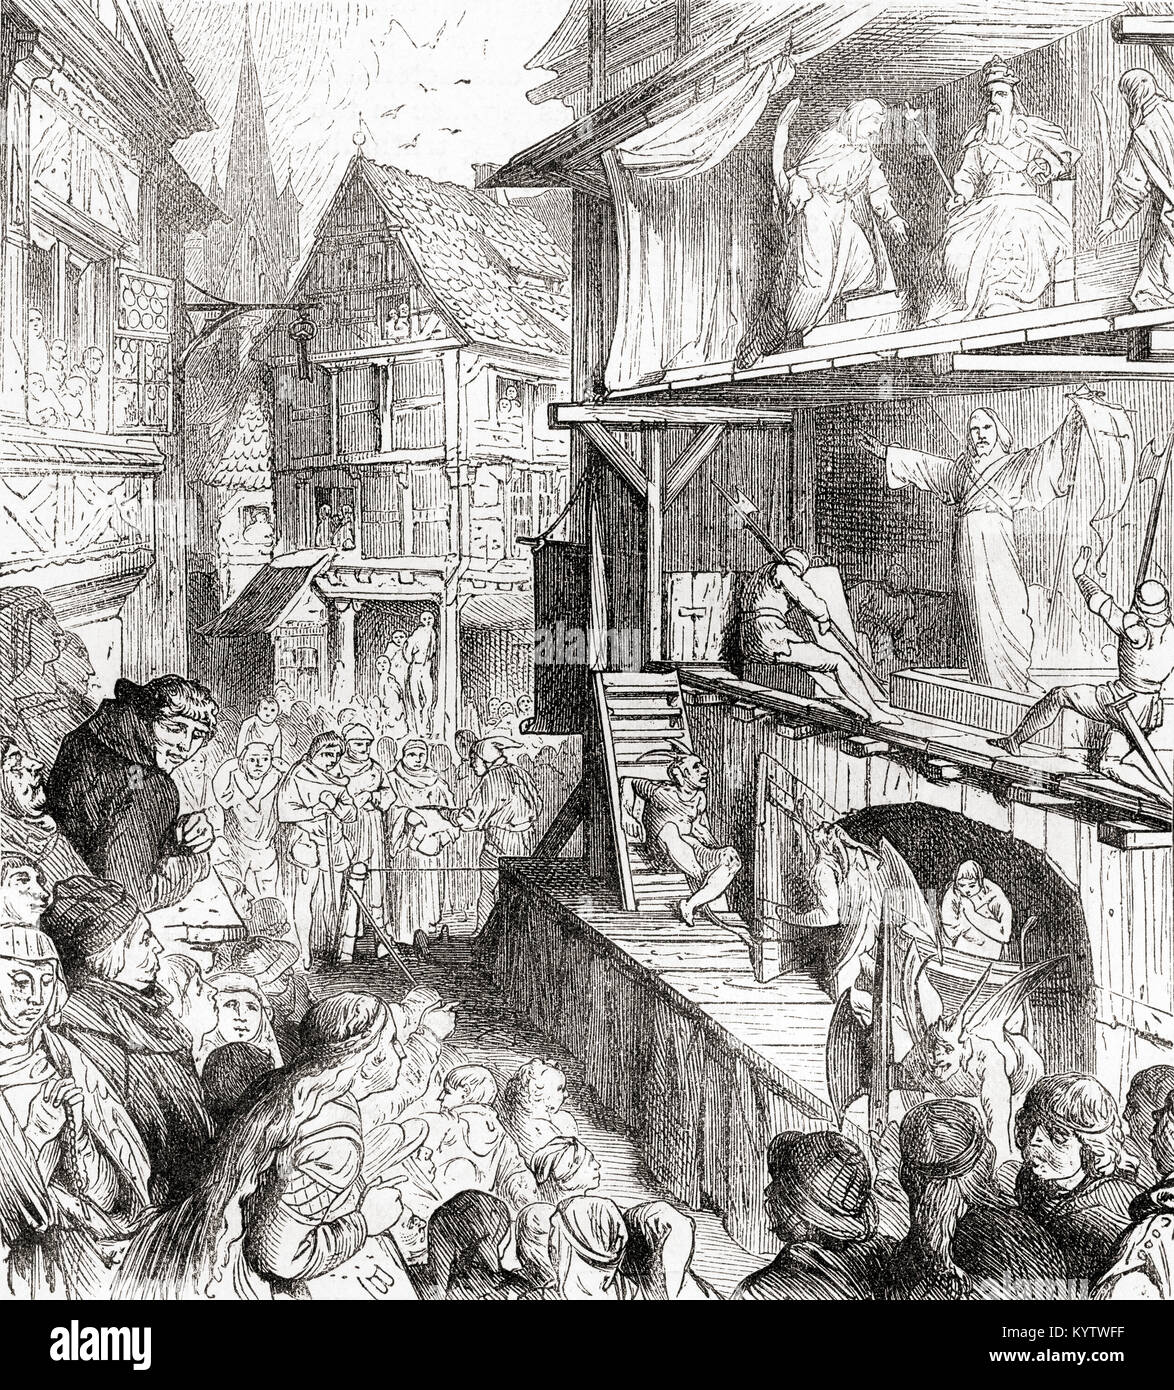 A Passion play, a medieval drama.  From Ward and Lock's Illustrated History of the World, published c.1882. Stock Photo